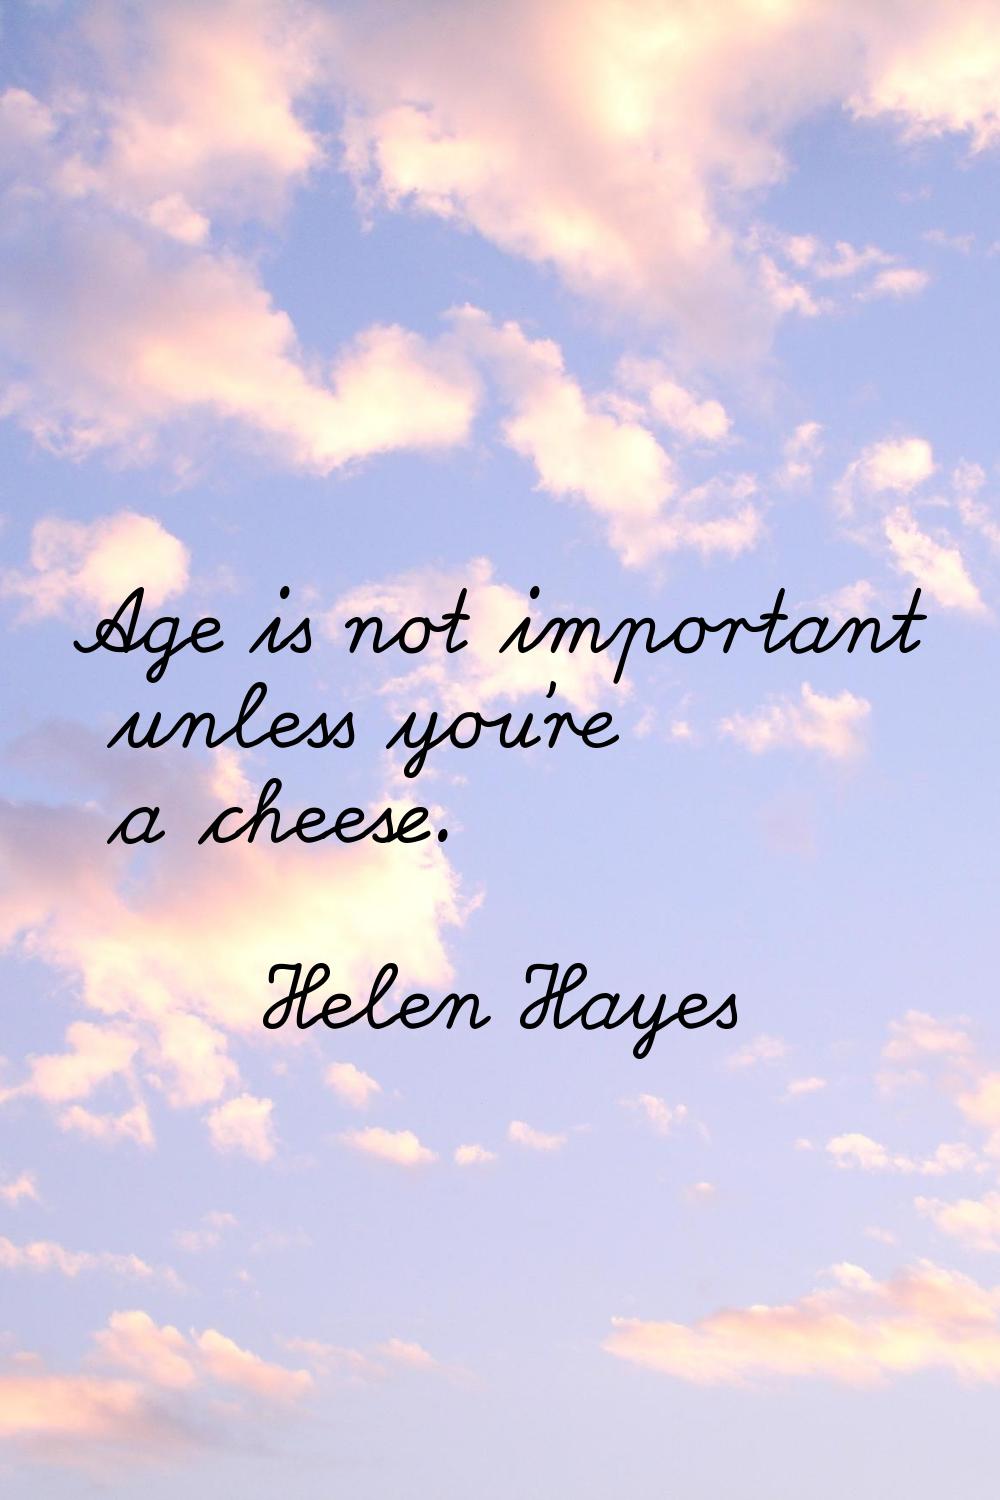 Age is not important unless you're a cheese.